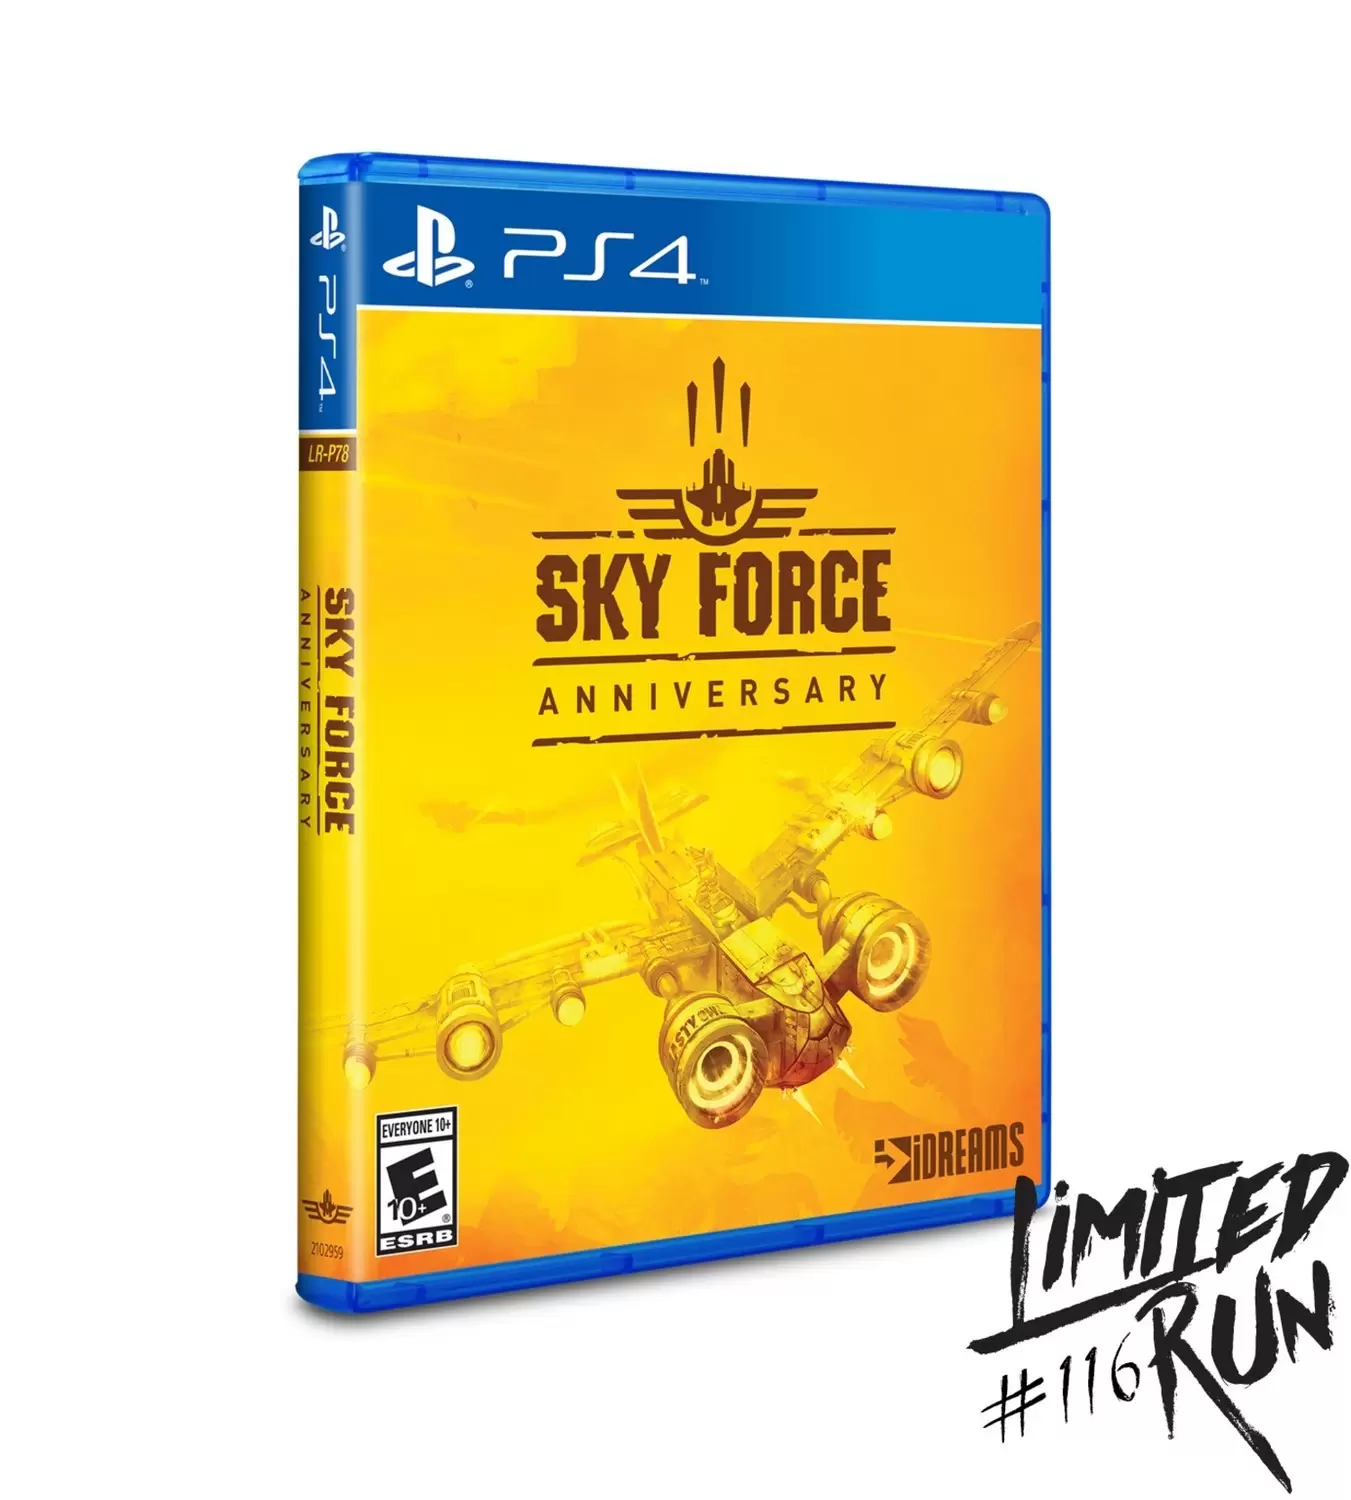 PS4 Games - Sky Force Anniversary